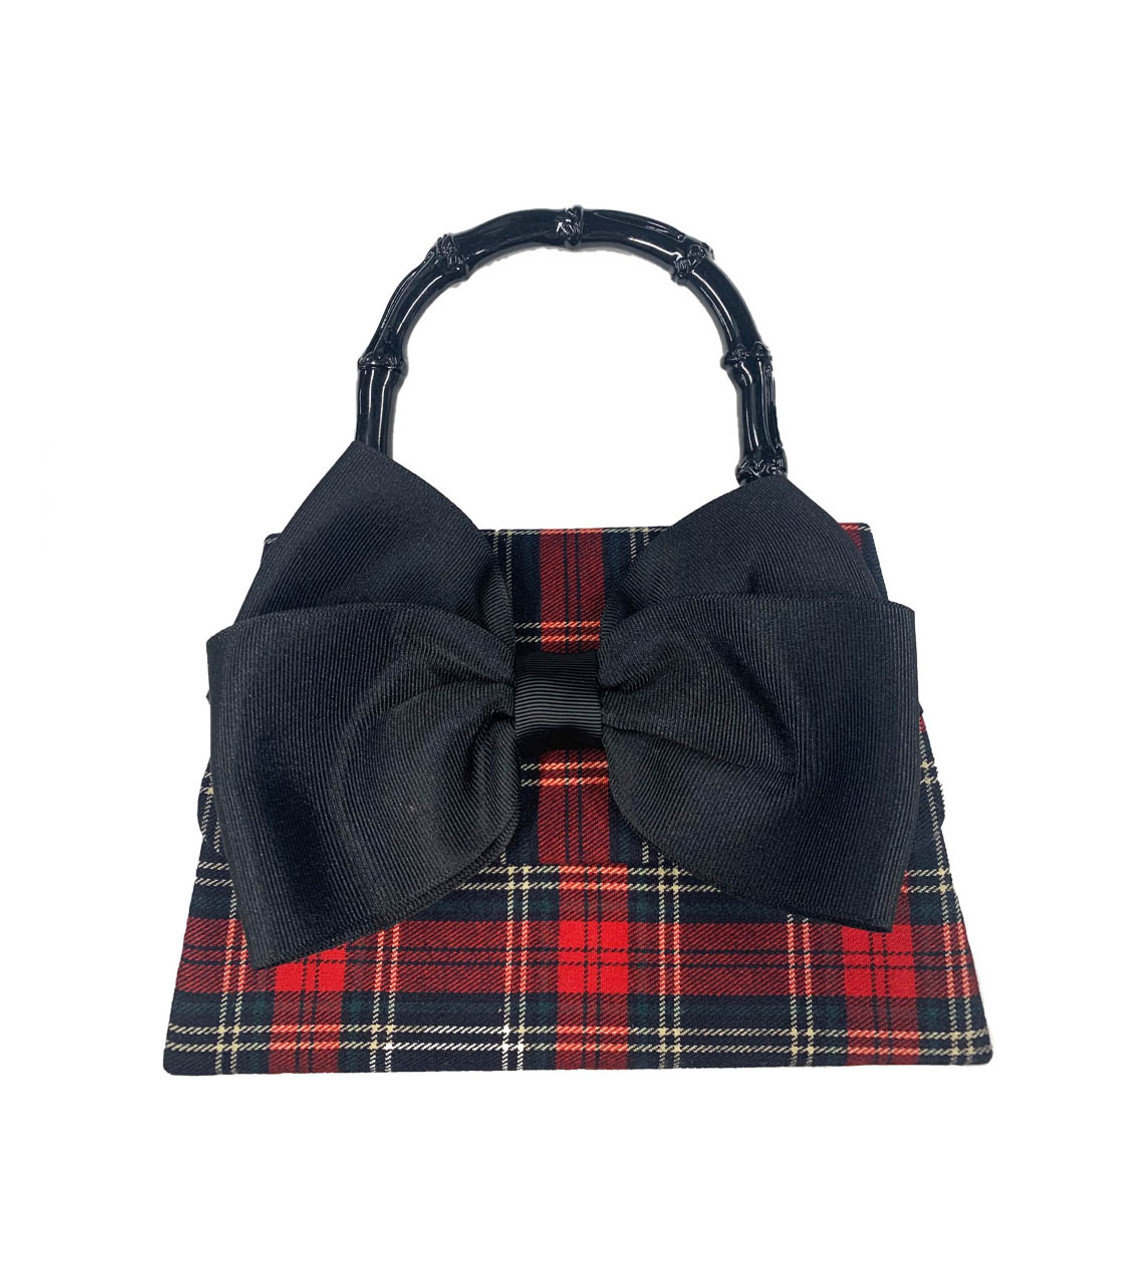 Lulu - Red Plaid with The Sammy Bow - Black Bamboo Handle